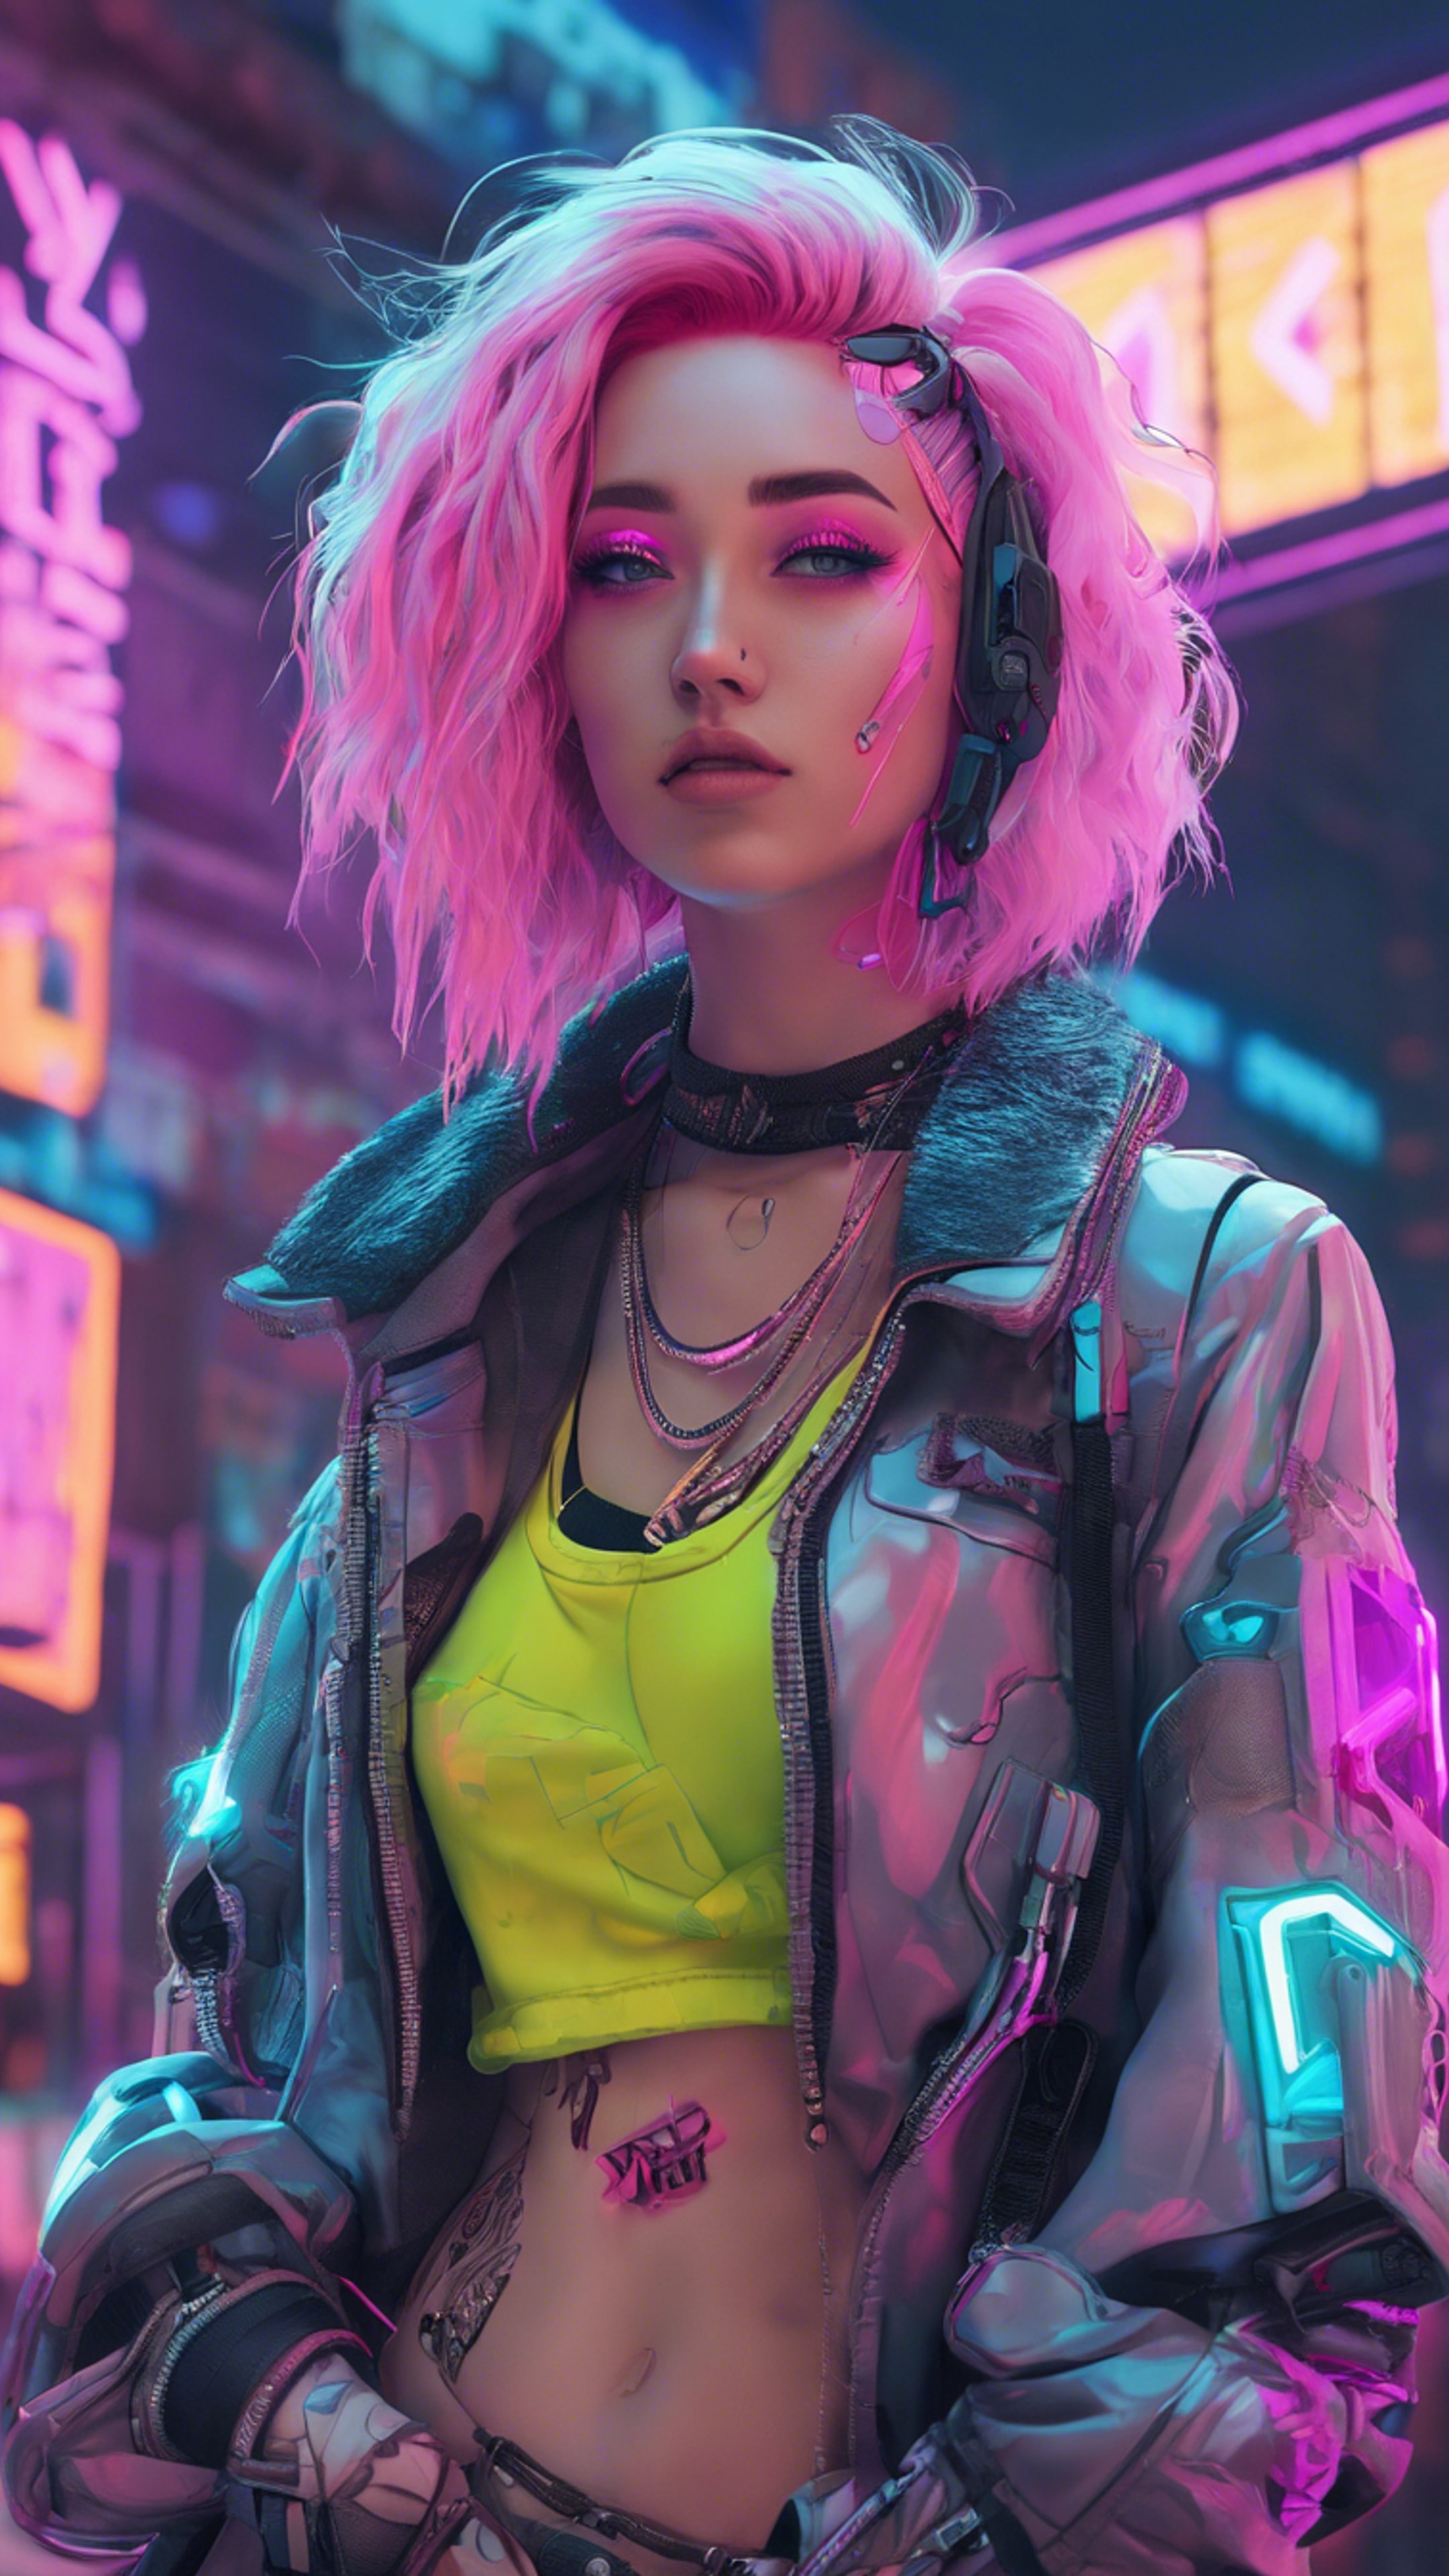 A pastel cyberpunk girl with brightly colored hair, standing in front of a neon sign. Tapeta[dbbad63d7b584975aa4e]